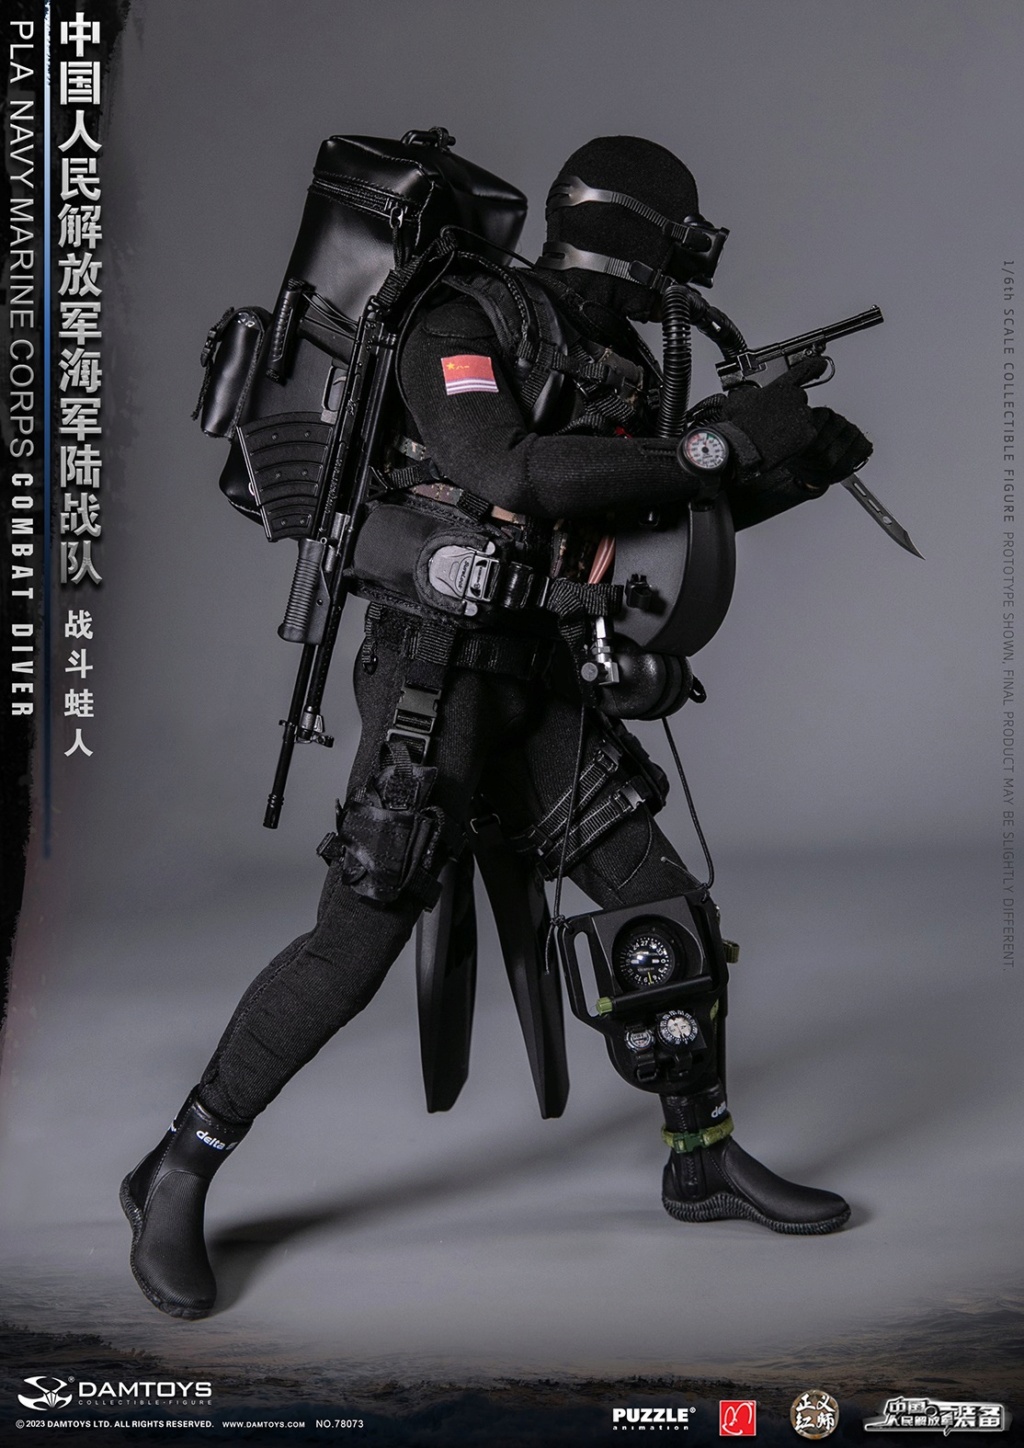 newproduct - NEW PRODUCT: DAMToys: 1/6 Chinese People's Liberation Army Marine Corps - Combat Frogman Action Figure #78073 14301311